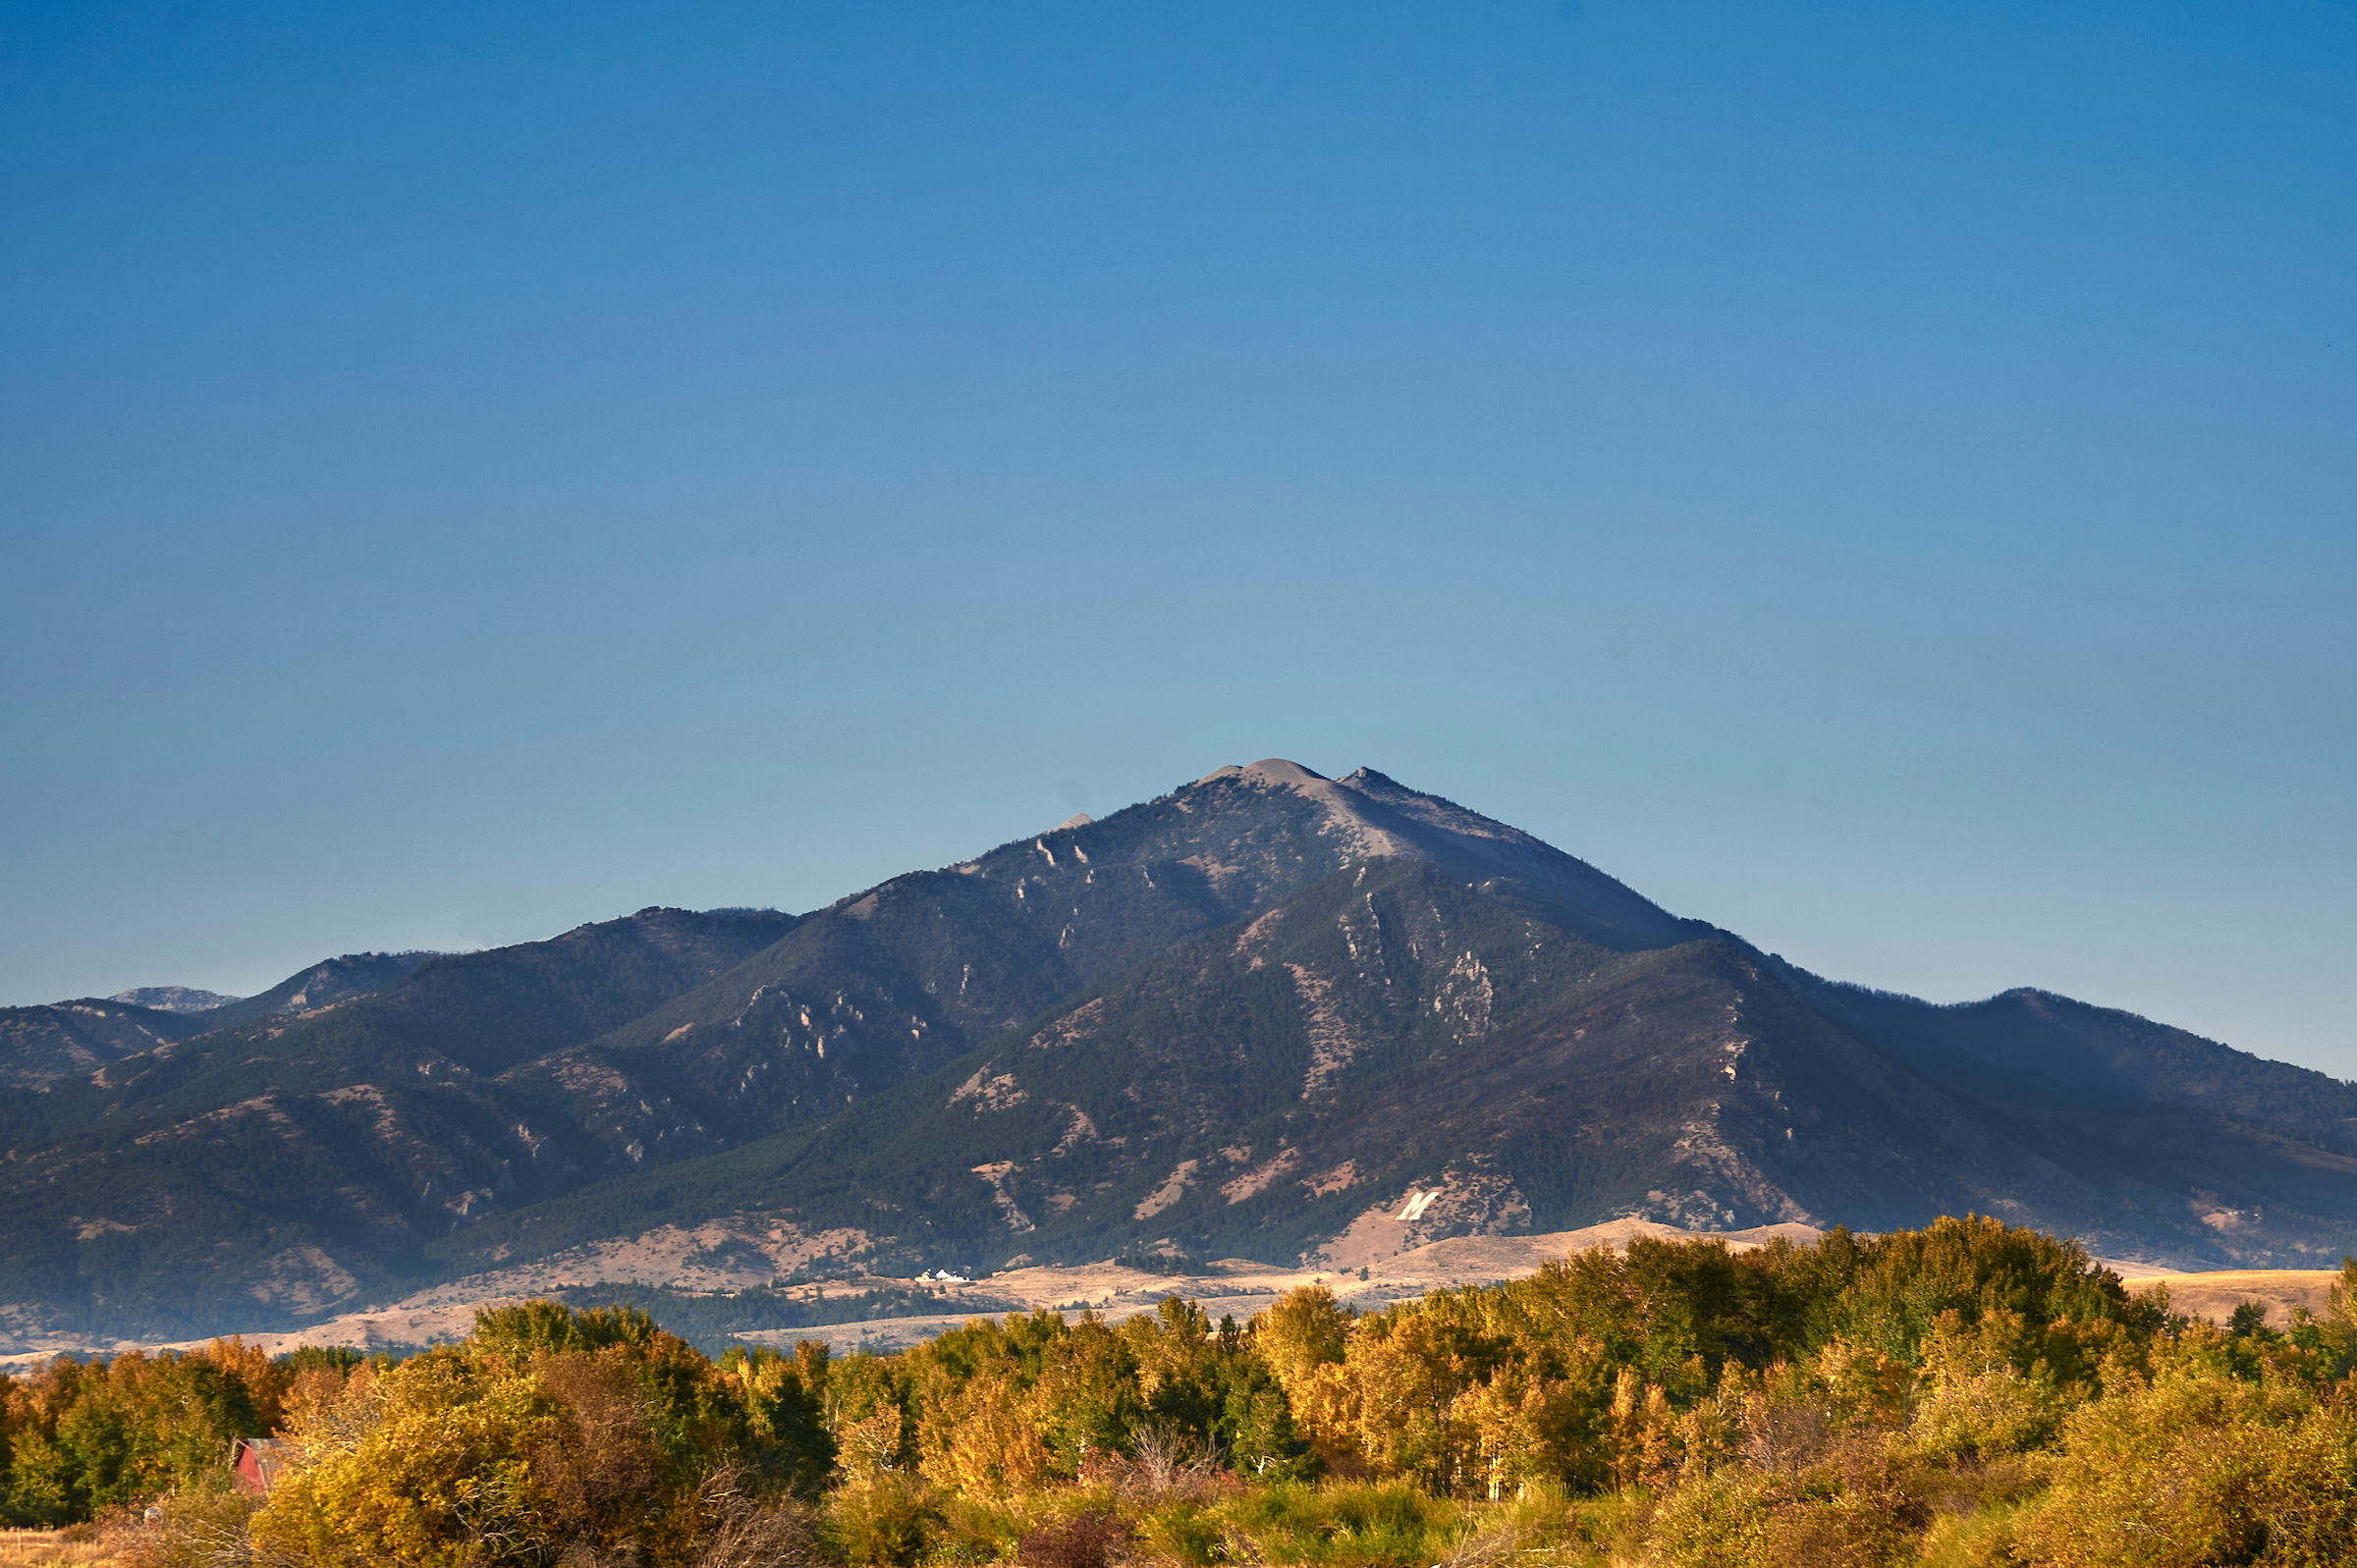 Bridger mountains with fall foliage in foreground